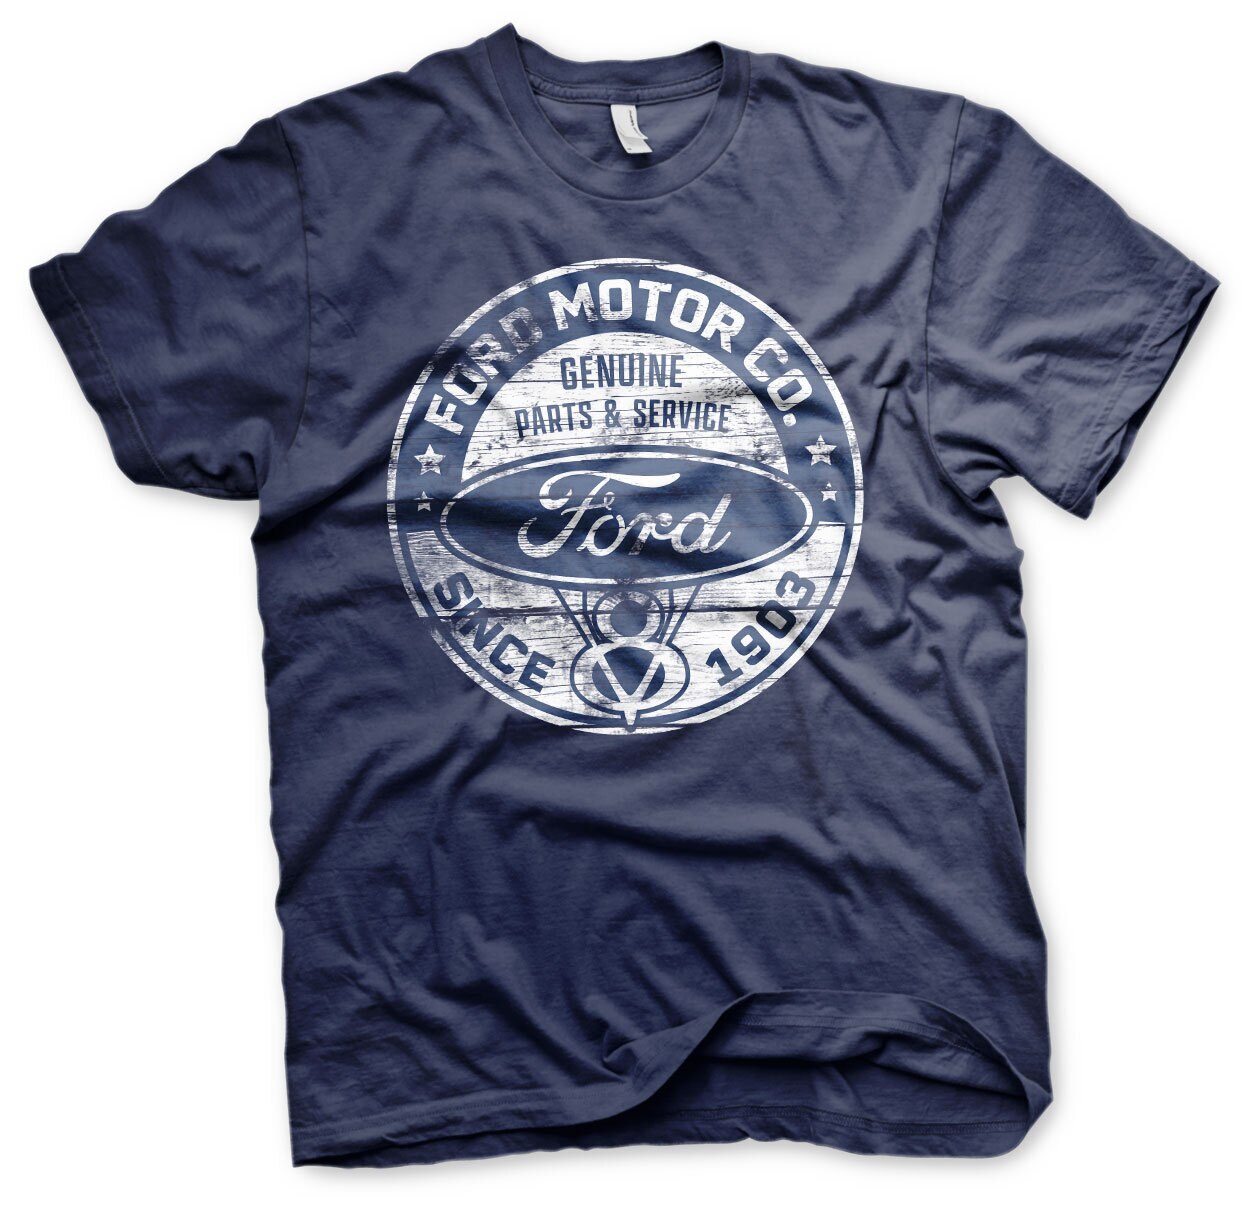 Ford Motor Co. Since 1903 T-Shirt